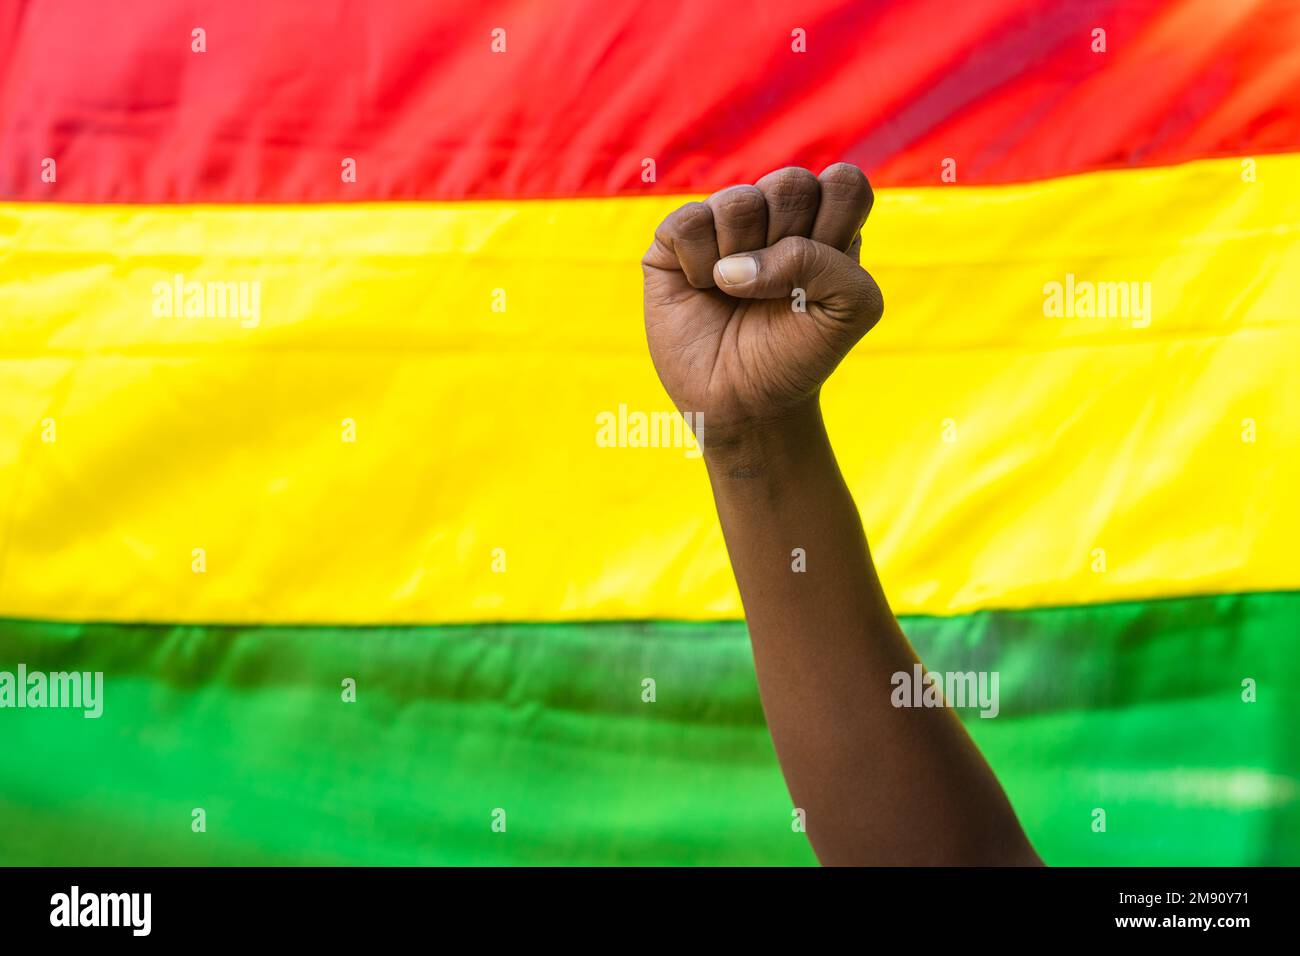 Concept of black history month celebration or activist Hand rising waving against flag. Stock Photo